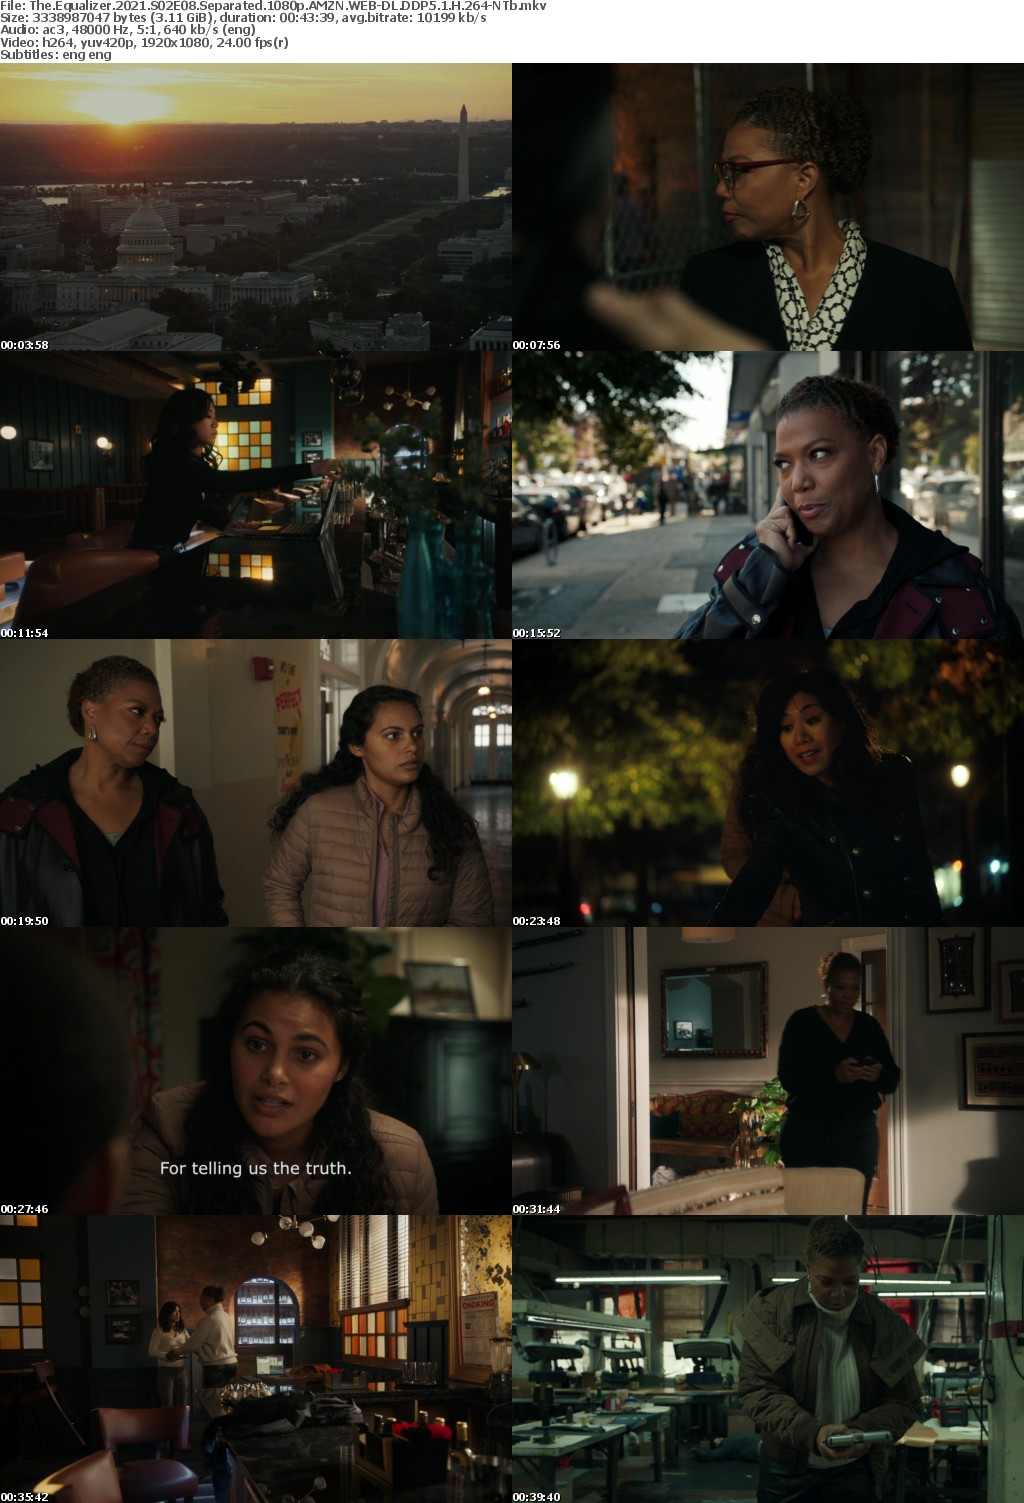 The Equalizer 2021 S02E08 Separated 1080p AMZN WEBRip DDP5 1 x264-NTb